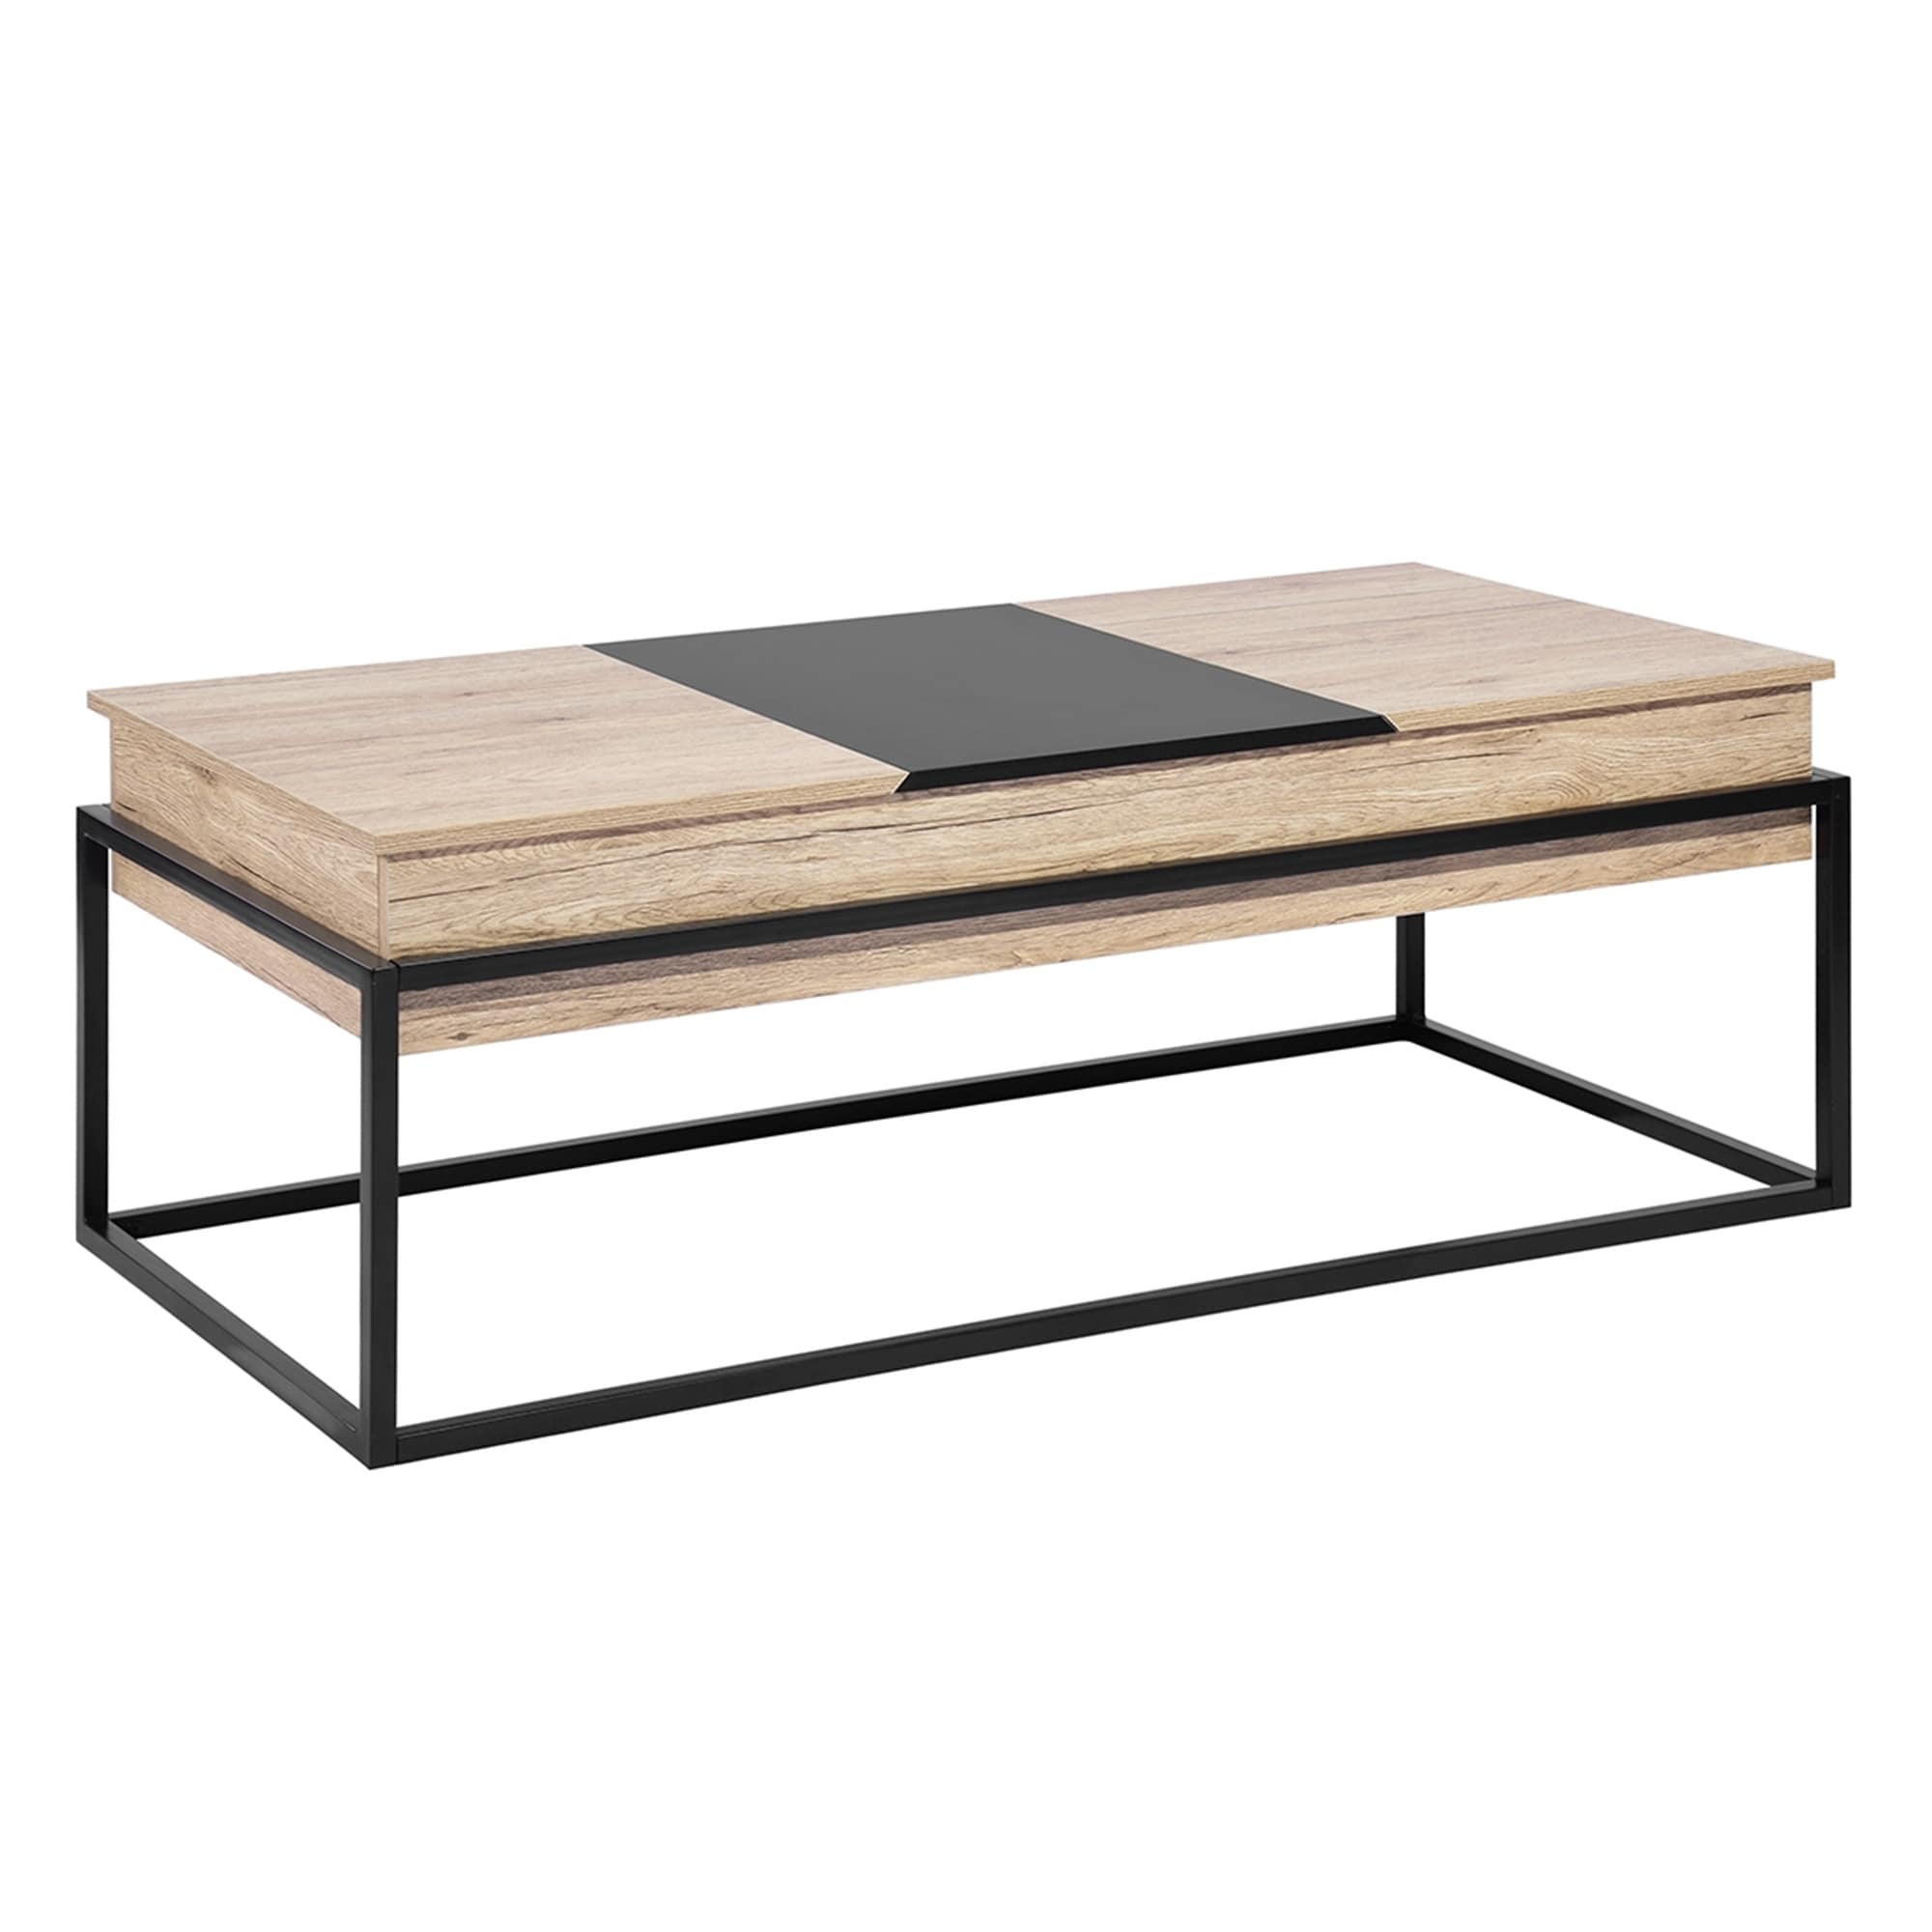 Clihome 47.2"" Wood Lift Top Storage Coffee Table -  CL-SH4W50286